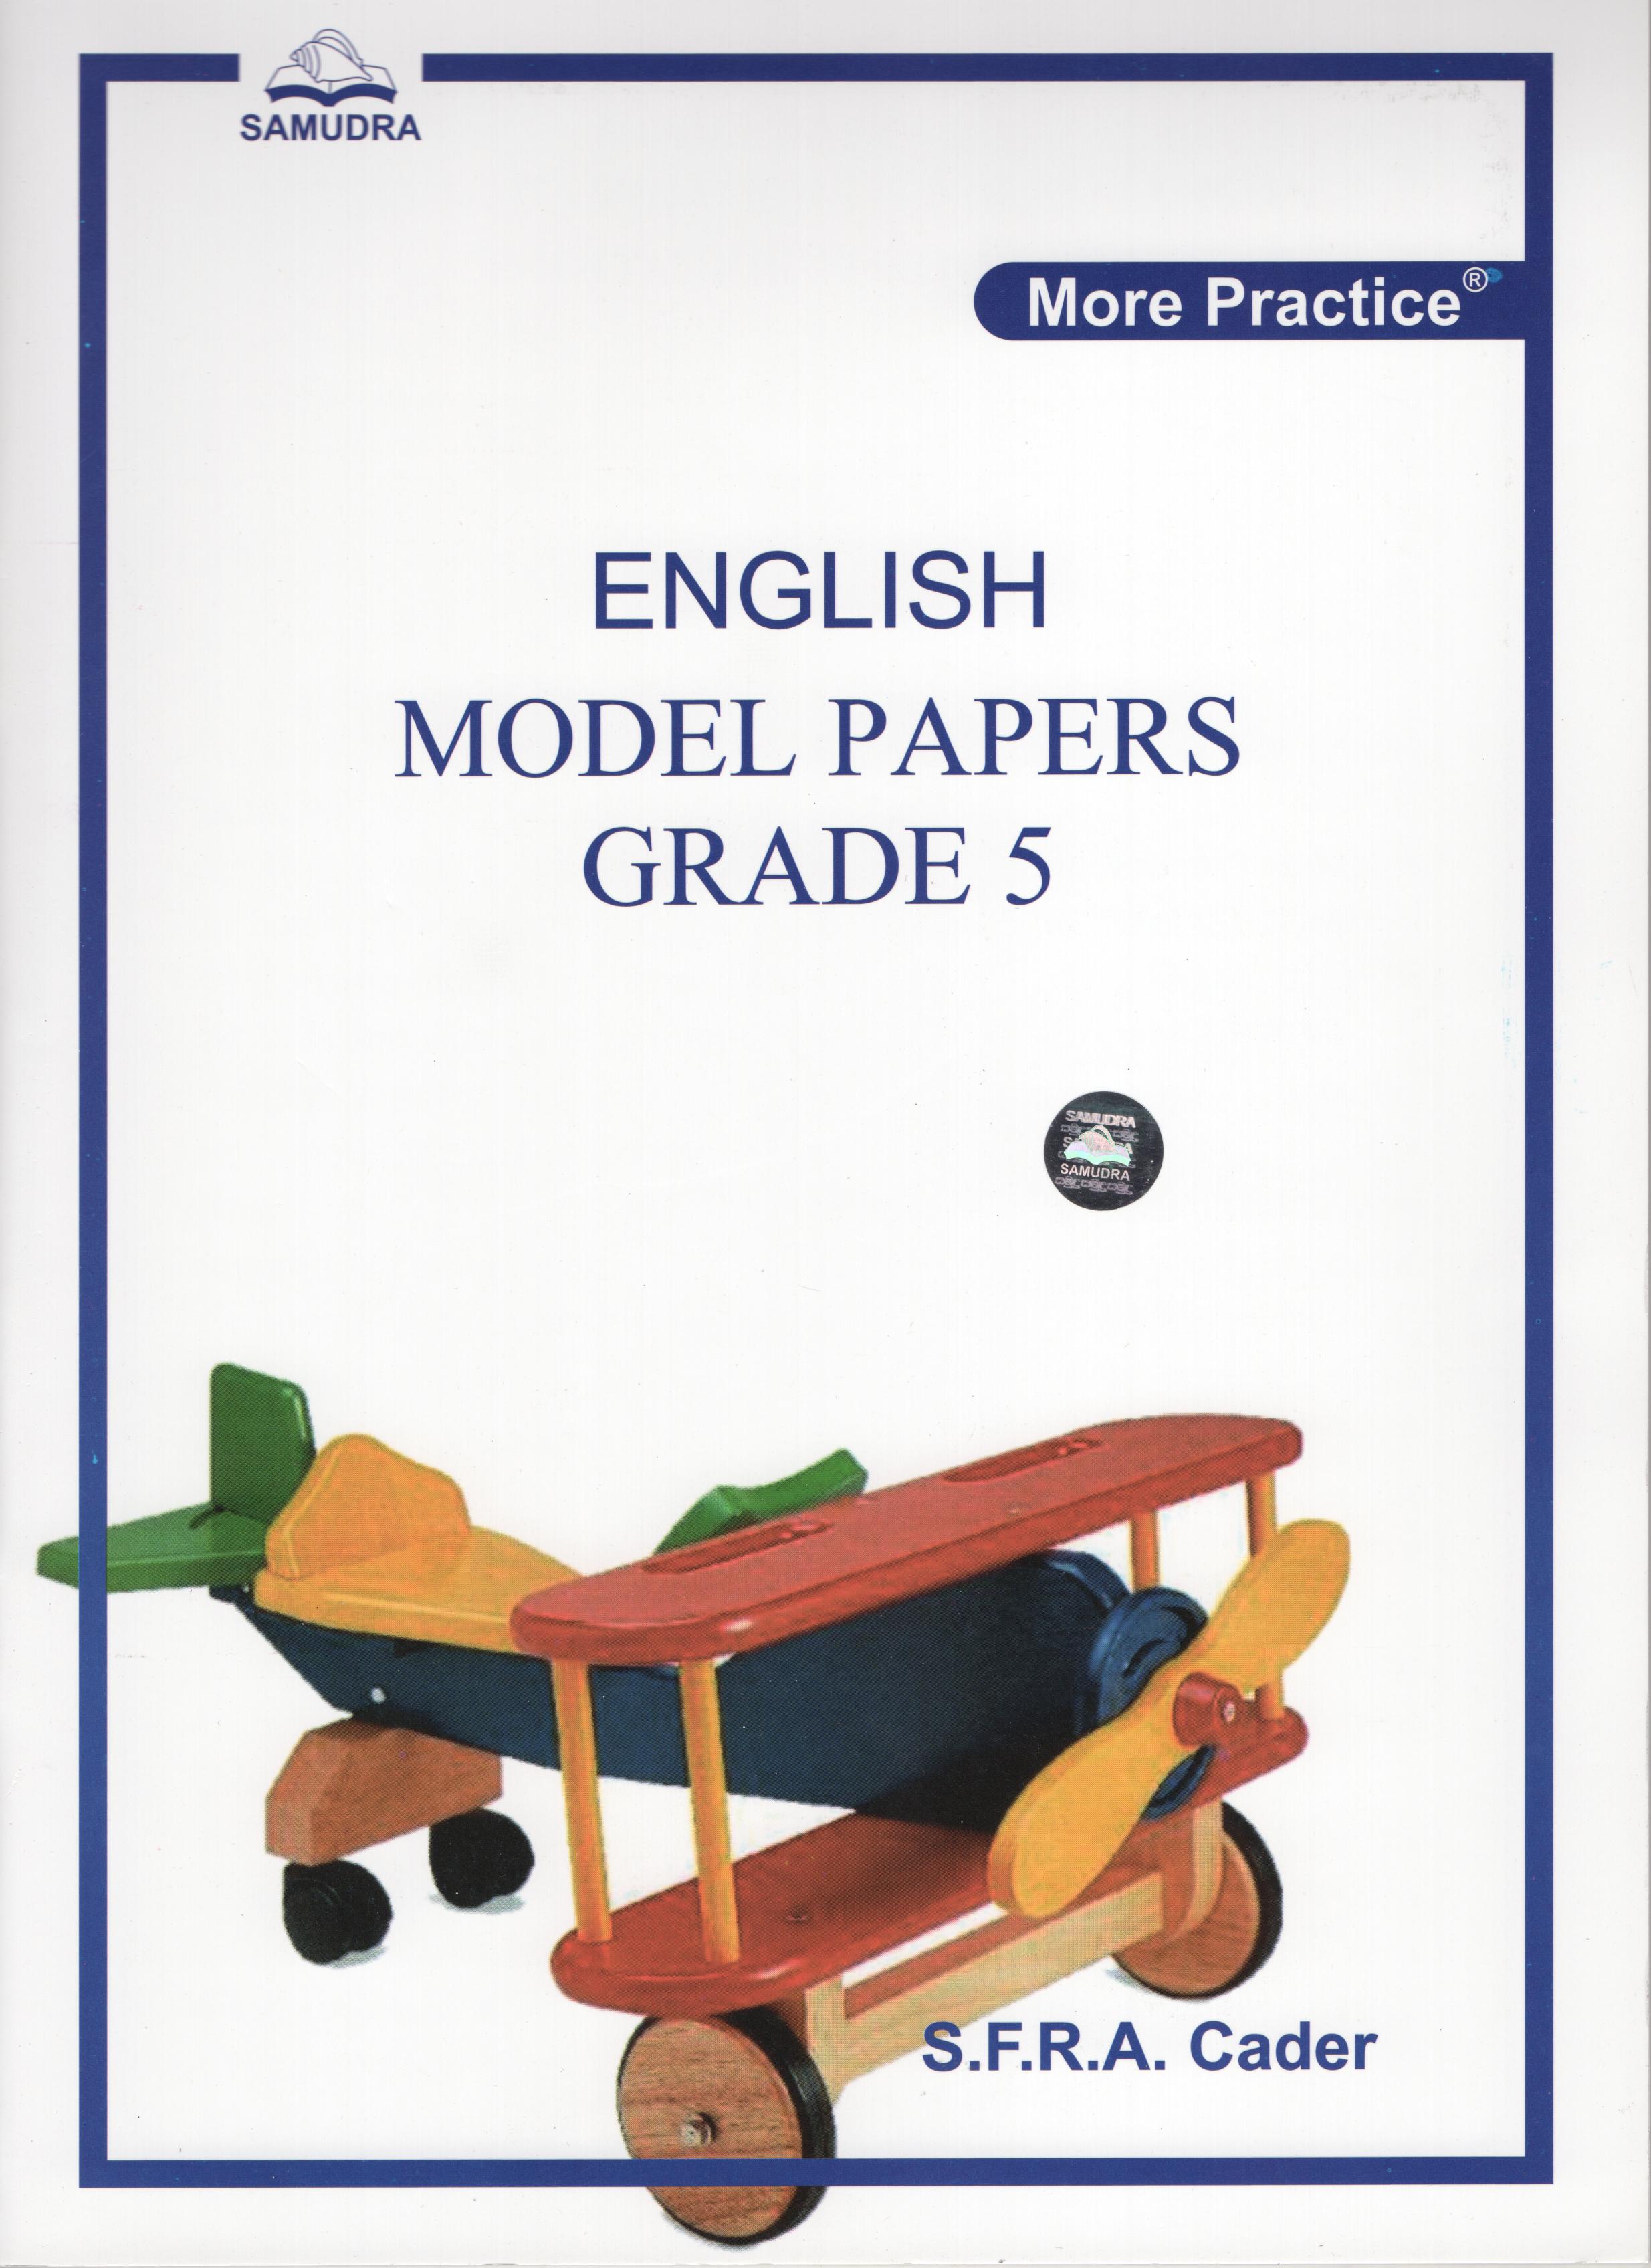 More Practice English Model Papers Grade 5